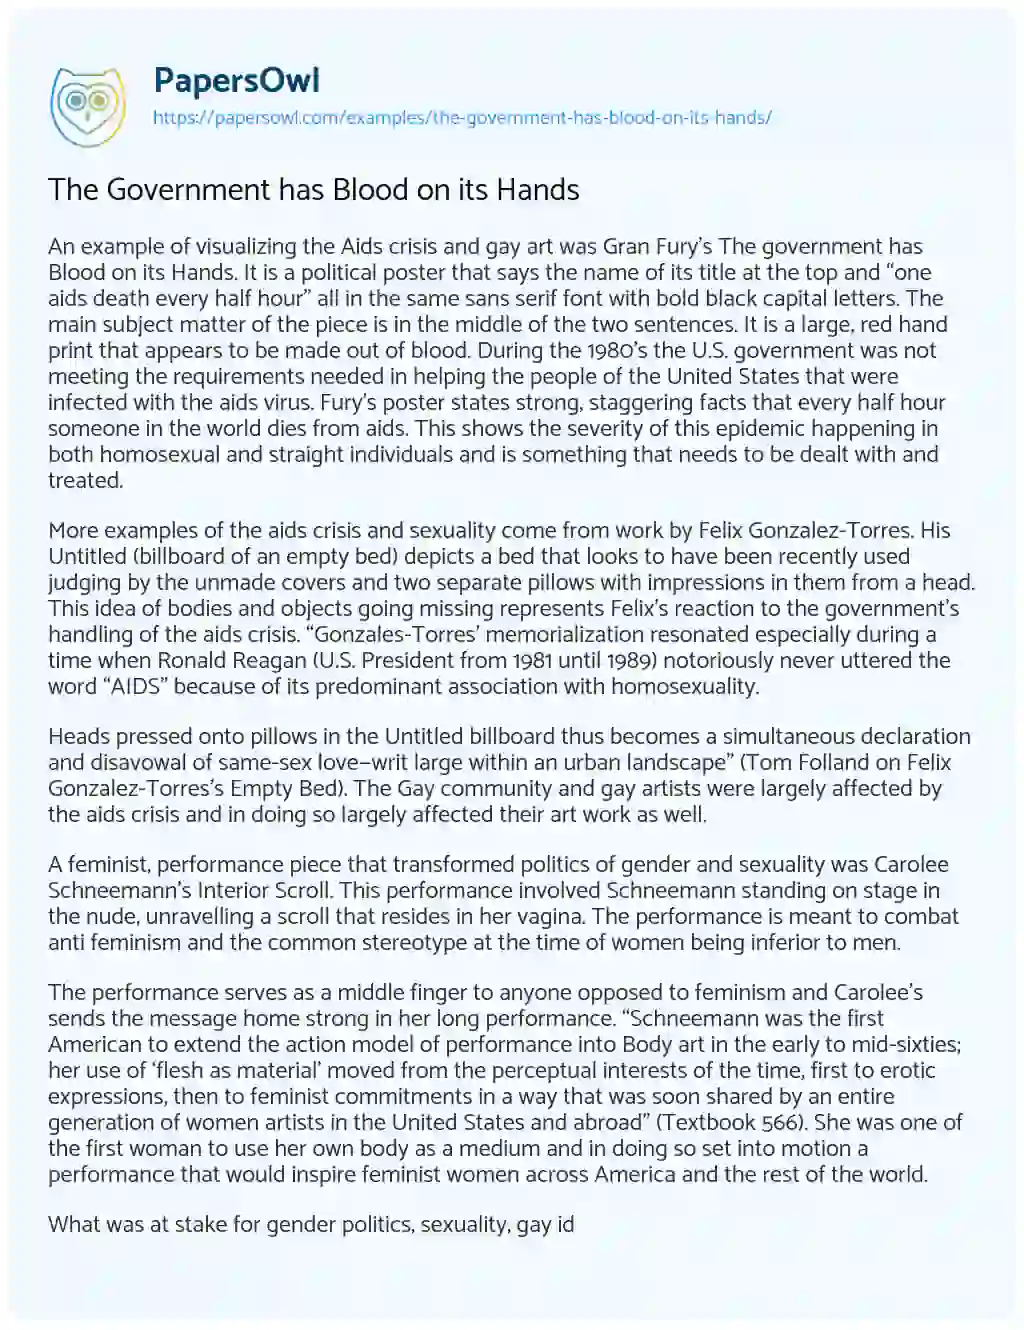 Essay on The Government has Blood on its Hands